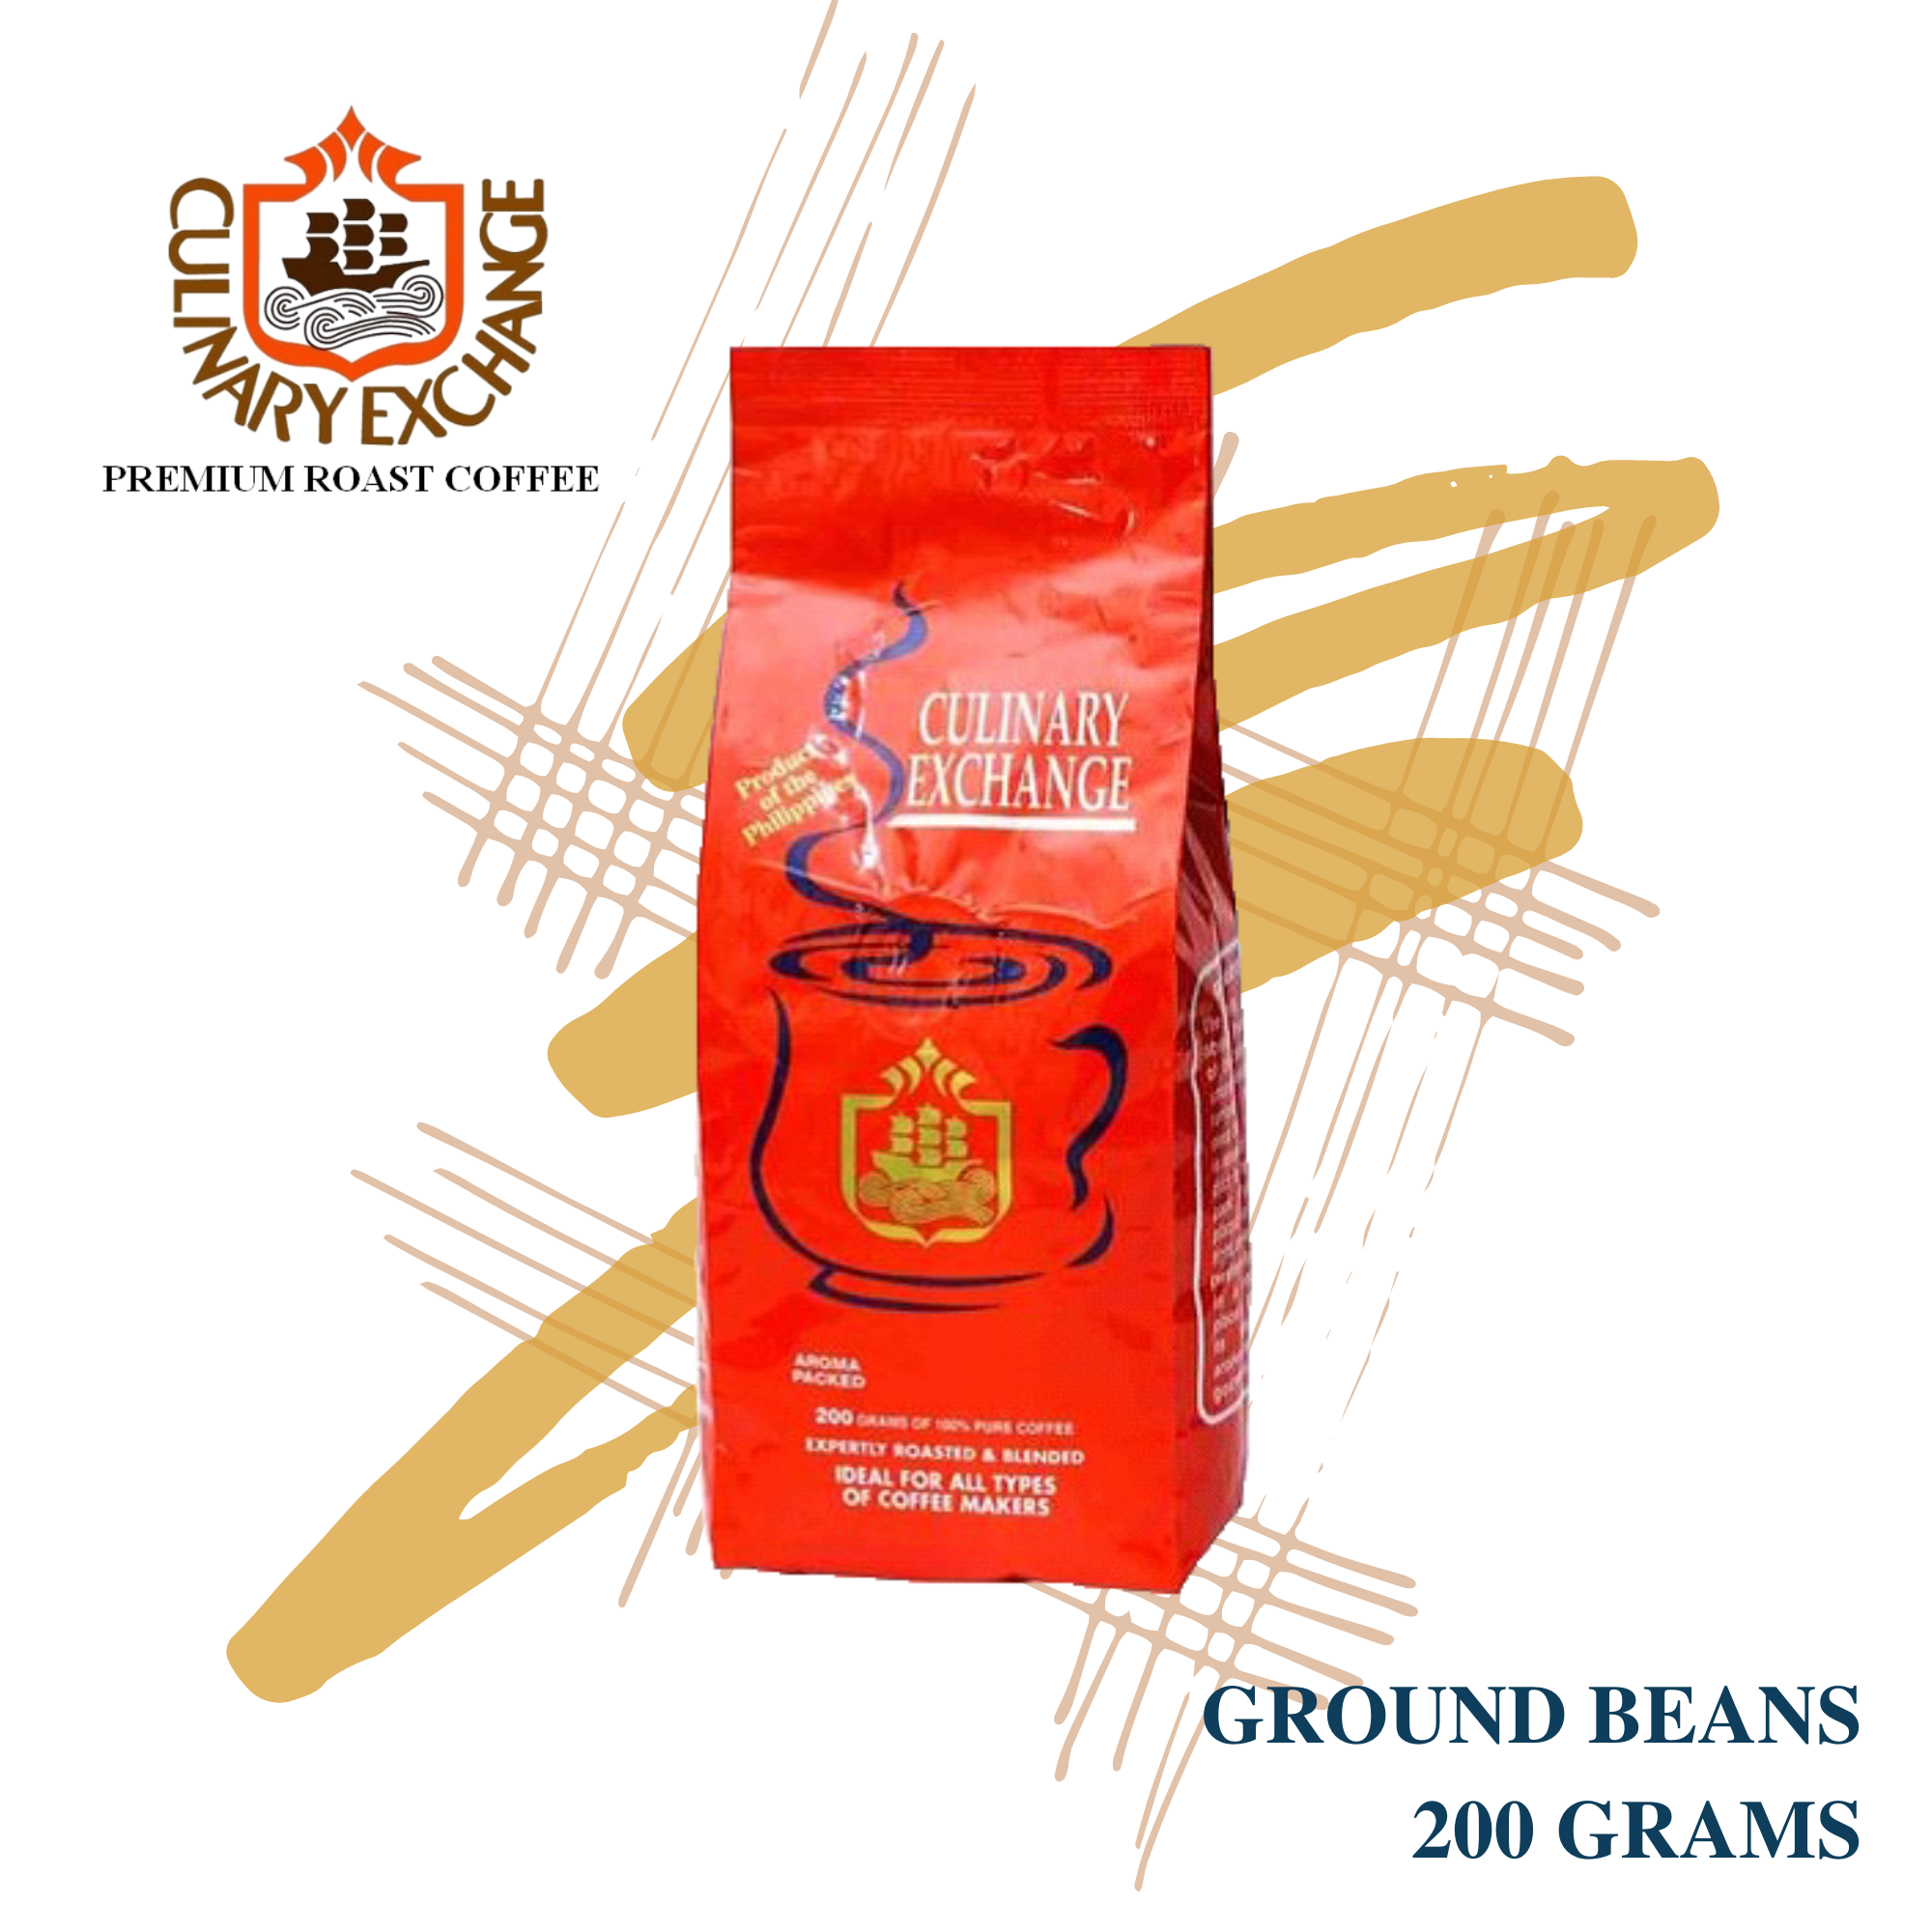 The Culinary Exchange Decaf Ground Coffee 200g